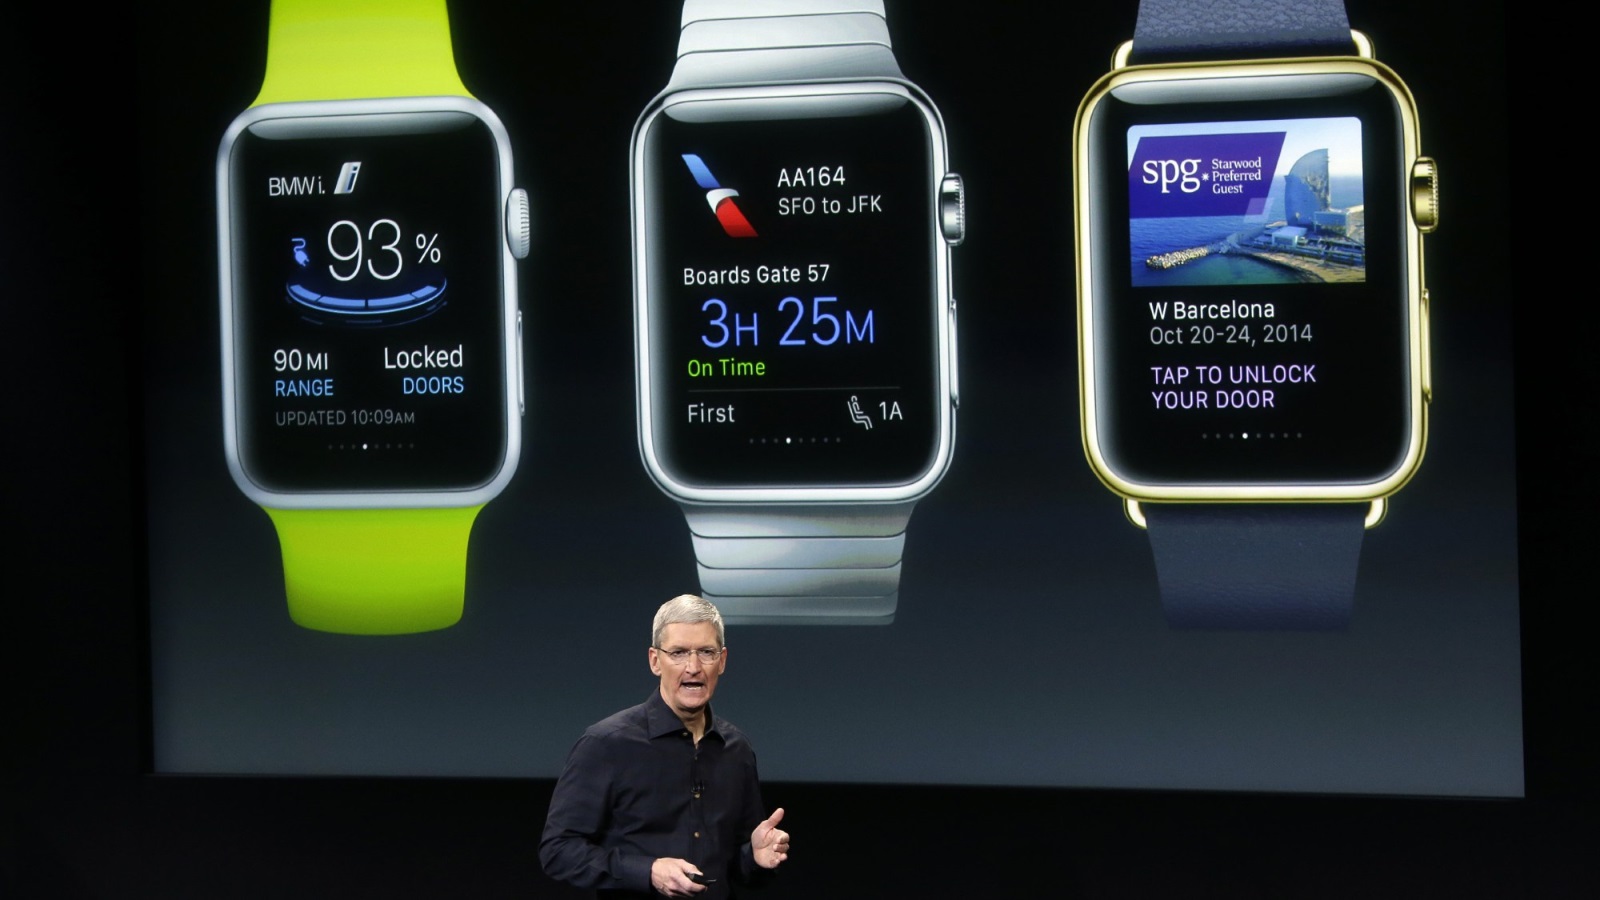 Apple's Tim Cook and the iWatch